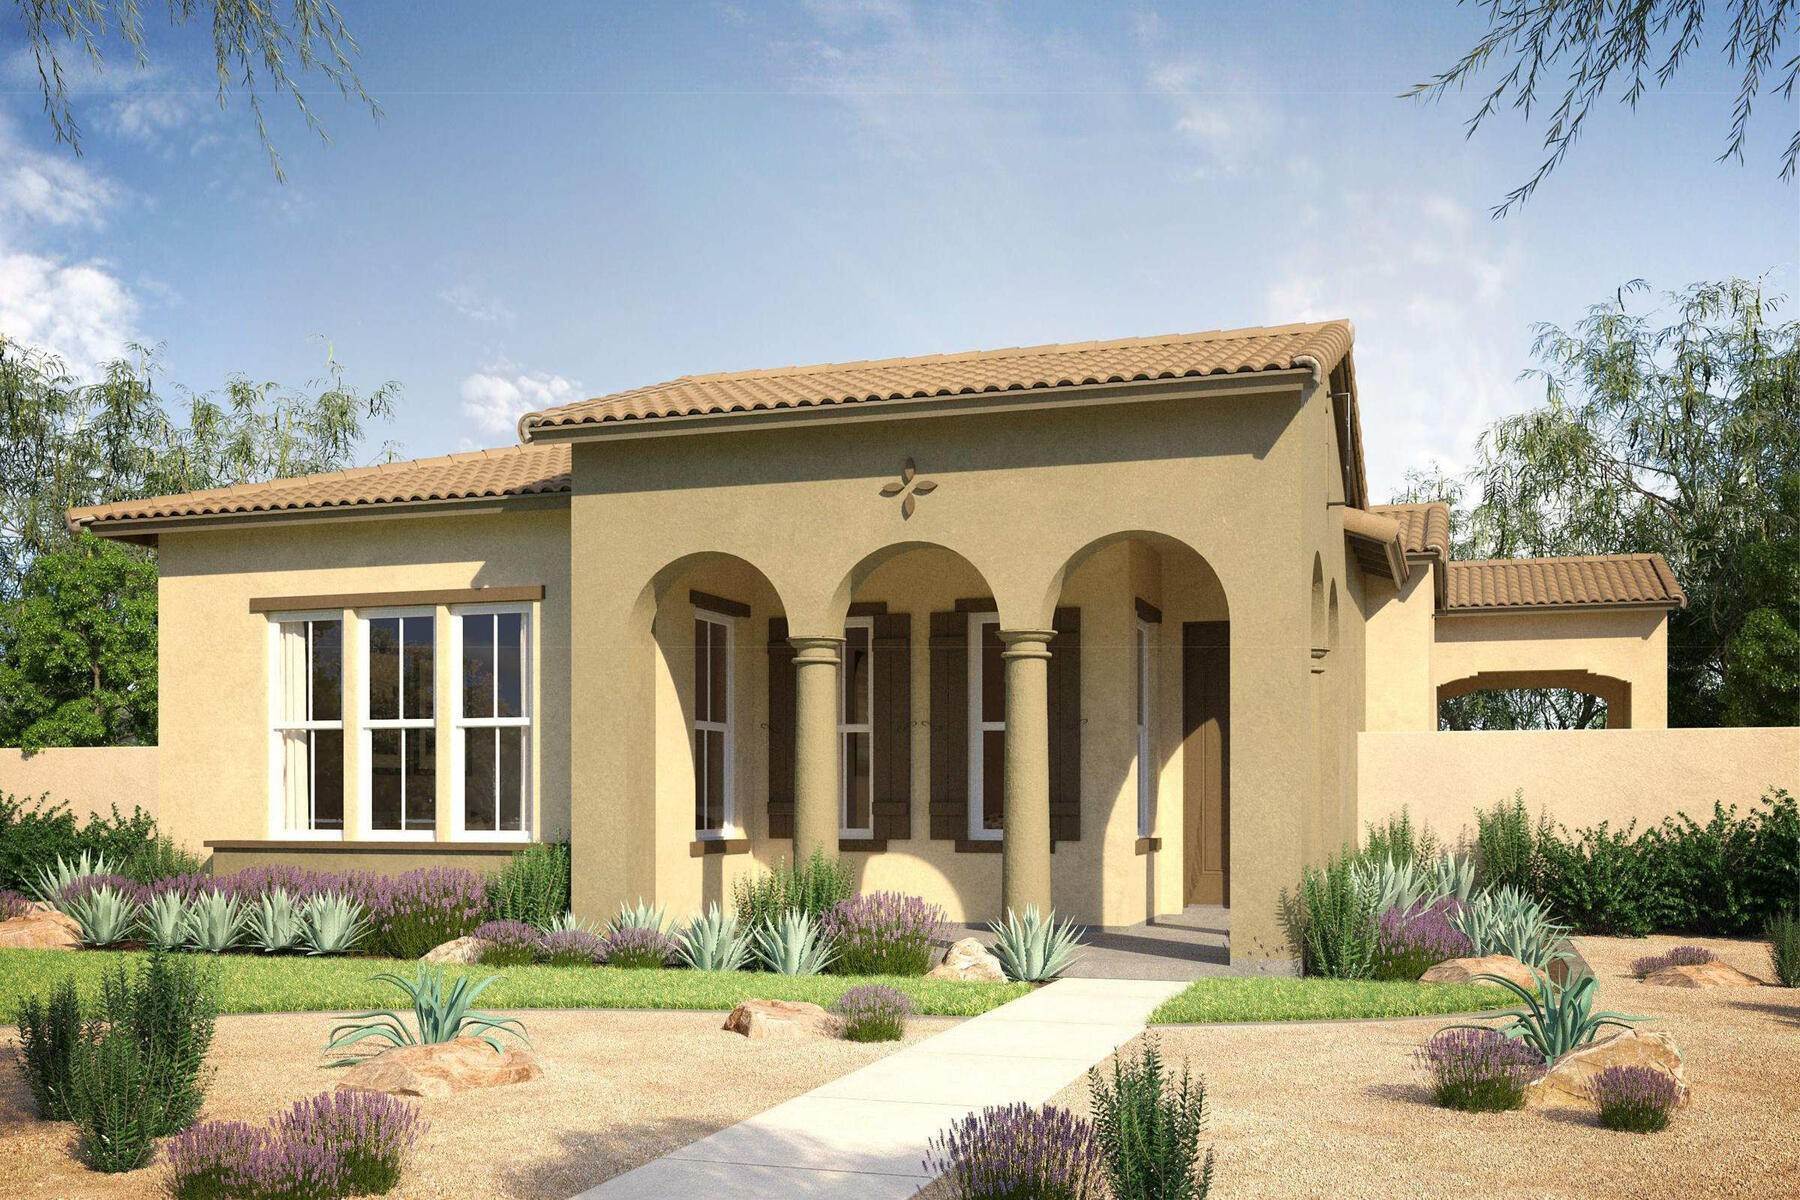 Single Family Homes for Sale at New Southwestern Contemporary Homes with Incredible Amenities in St. George Lot 140 Block S1 St. George, Utah 84790 United States